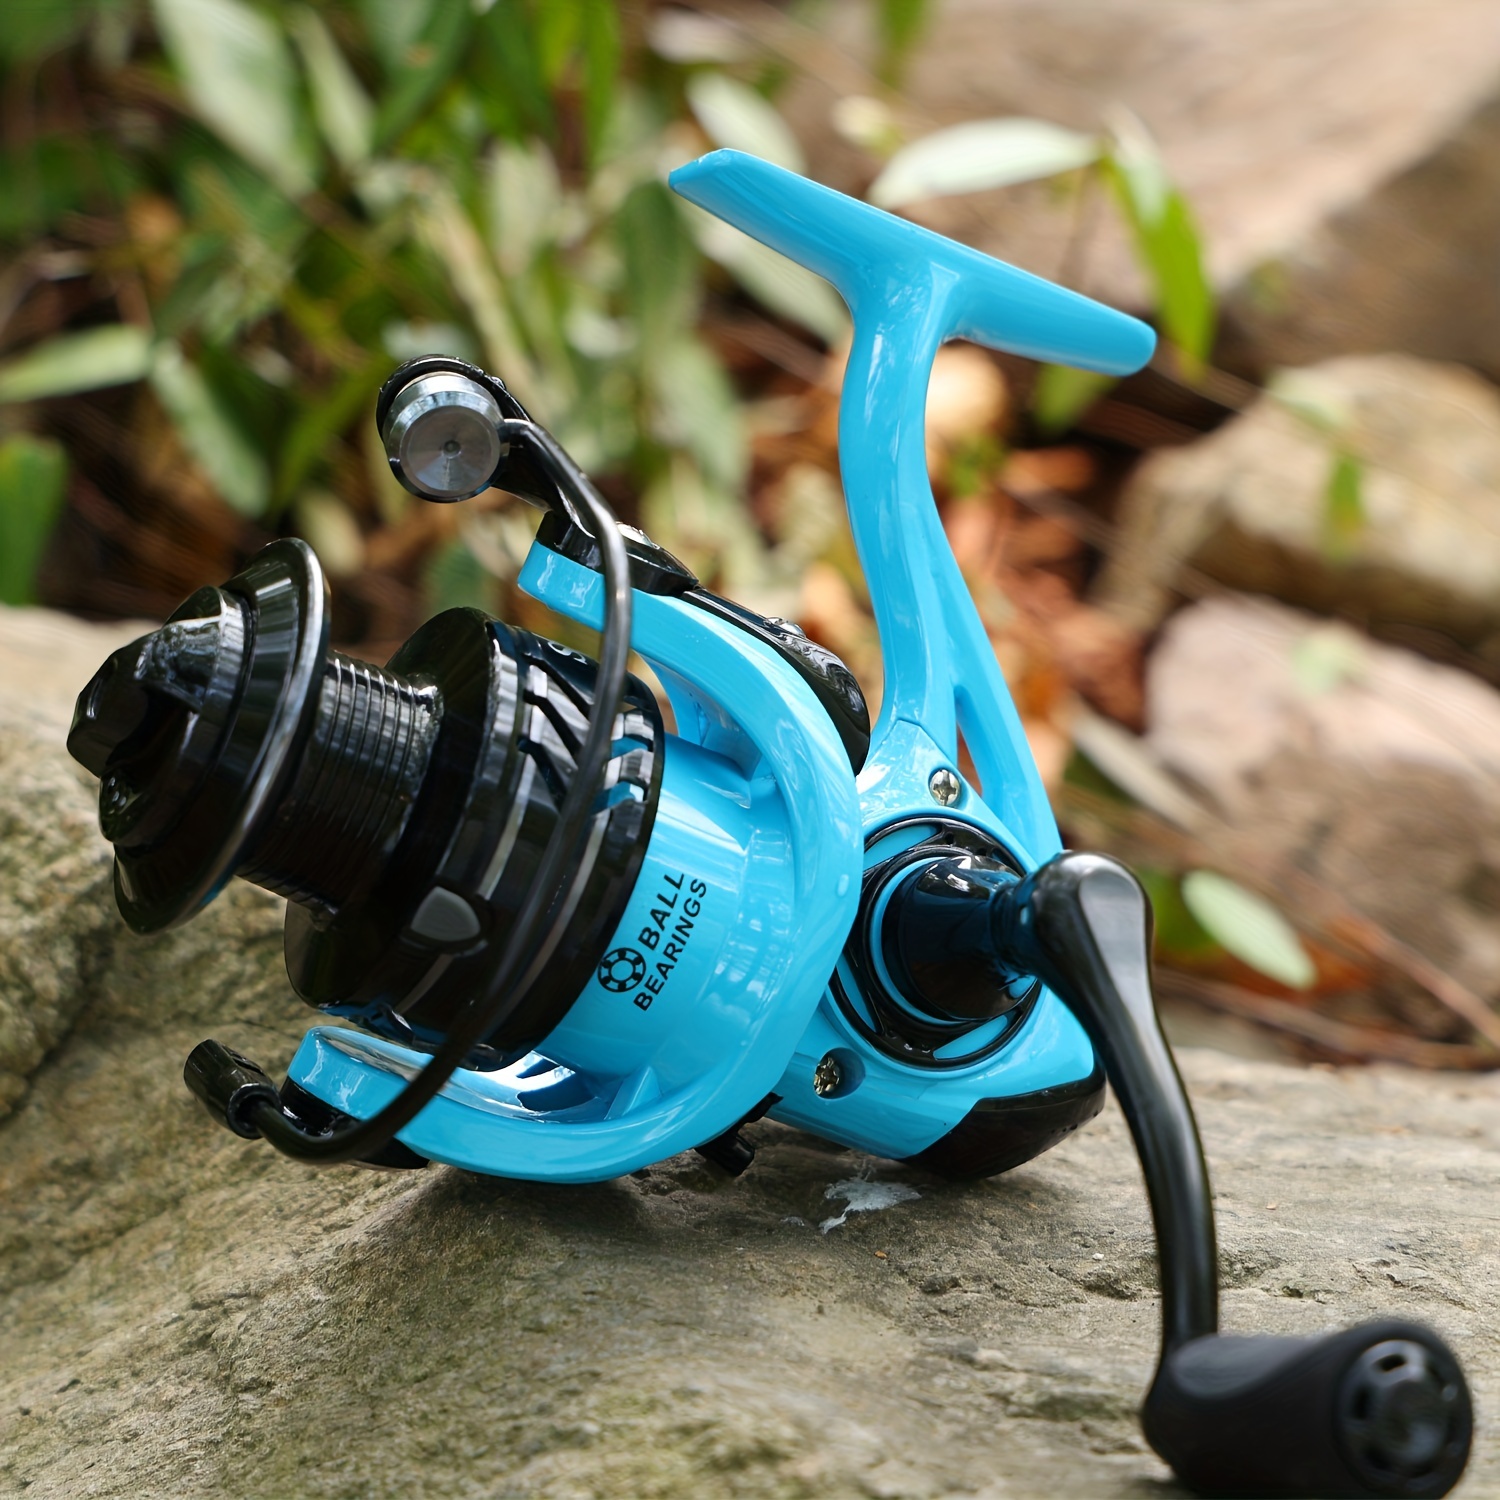 Sougayilang Spinning Fishing Reel 5.2:1 Gear Ratio 1000-4000 Series  Left/Right Inter-Changeable Fishing Reel For Freshwater Or Saltwater Fishing  Tackle Pesca